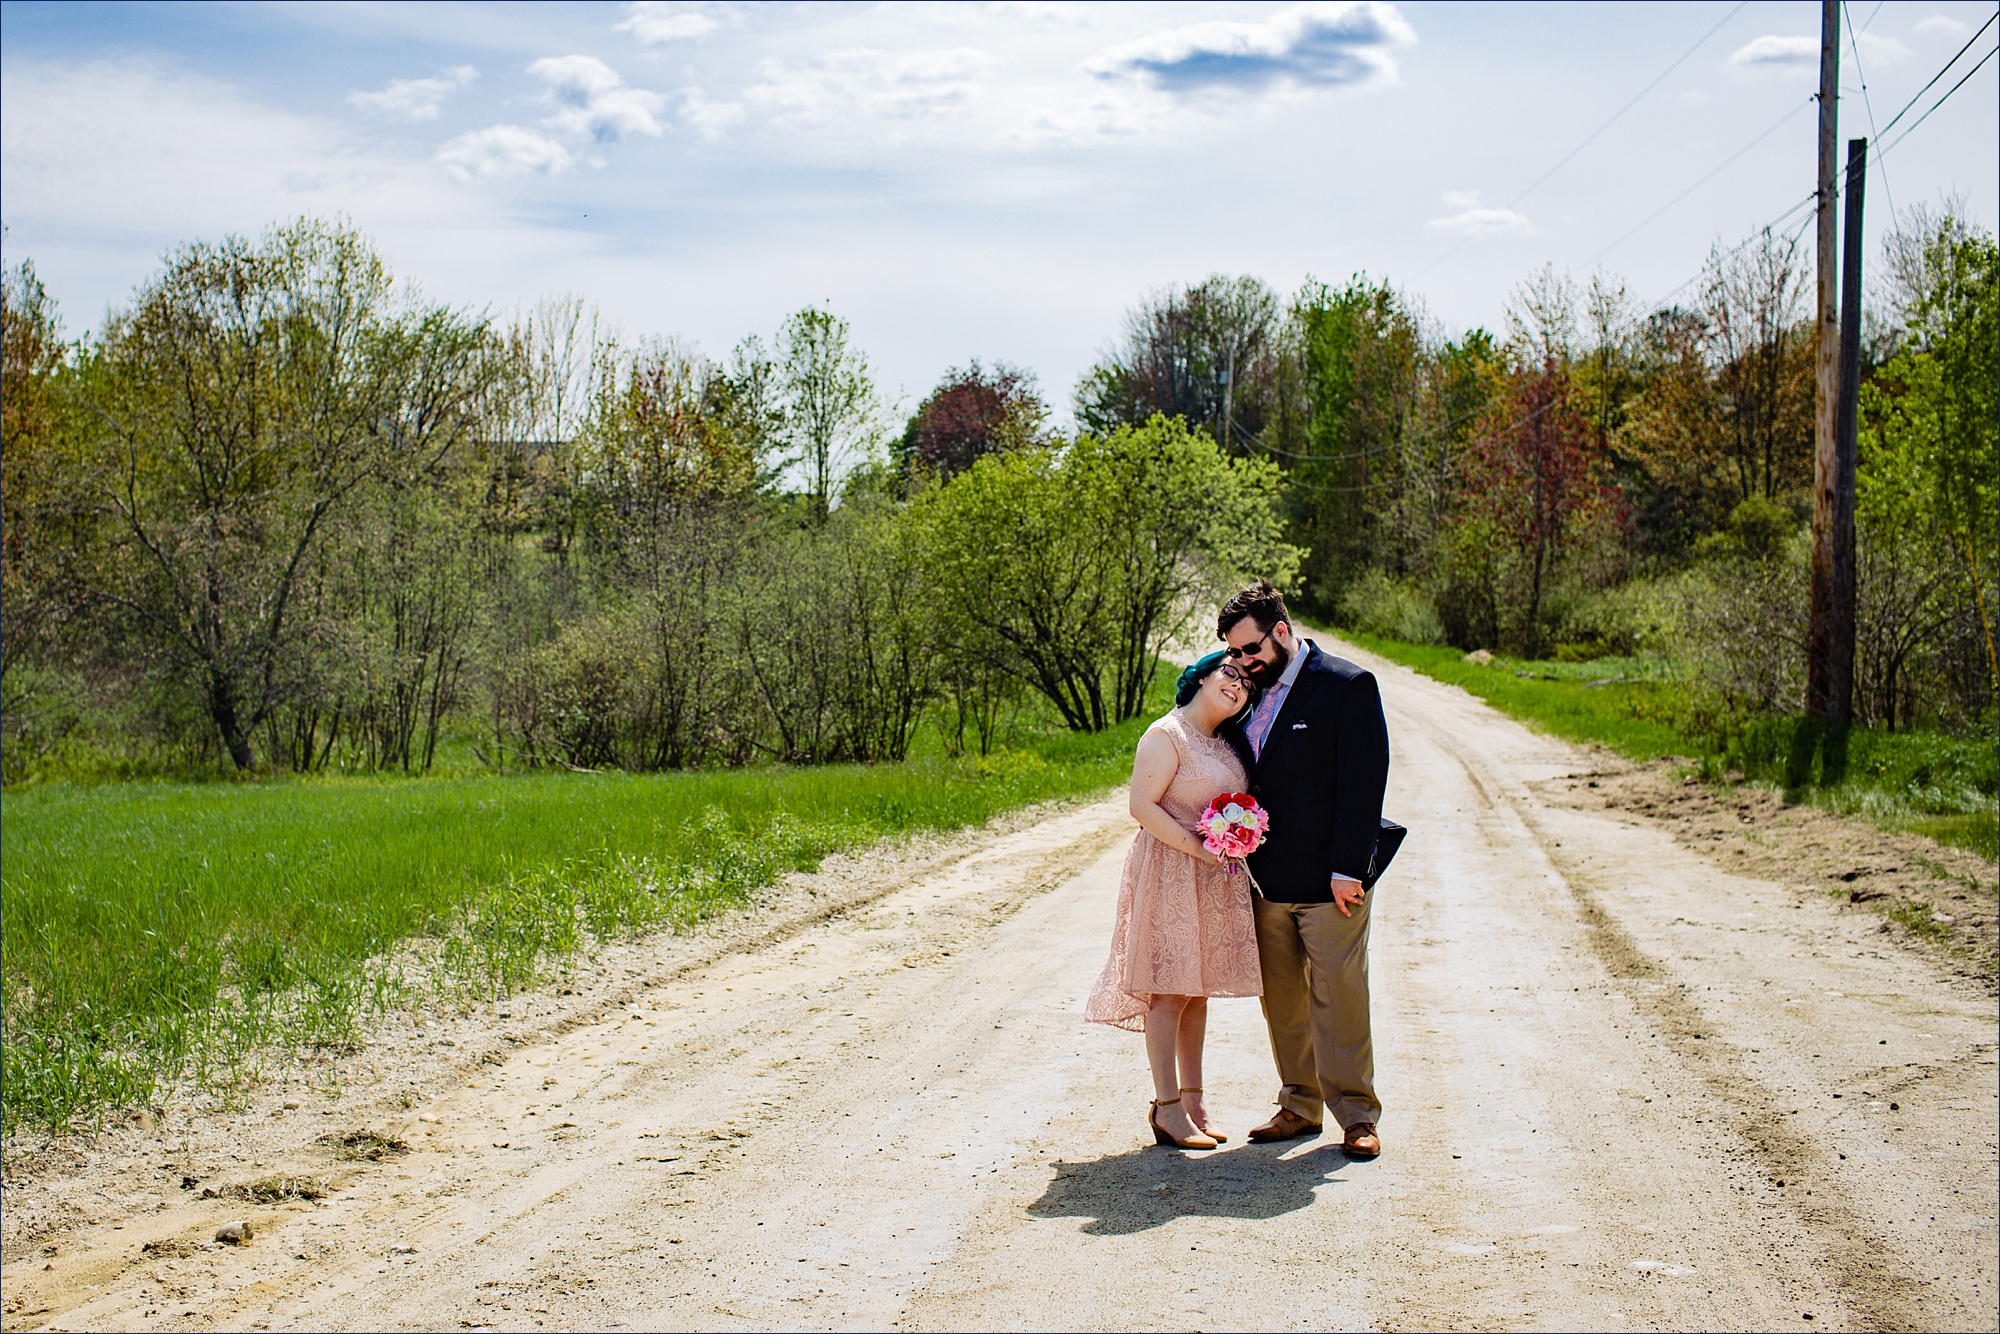 The bride and groom hold tight to one another on a Maine dirt road after officially being wed at home with family